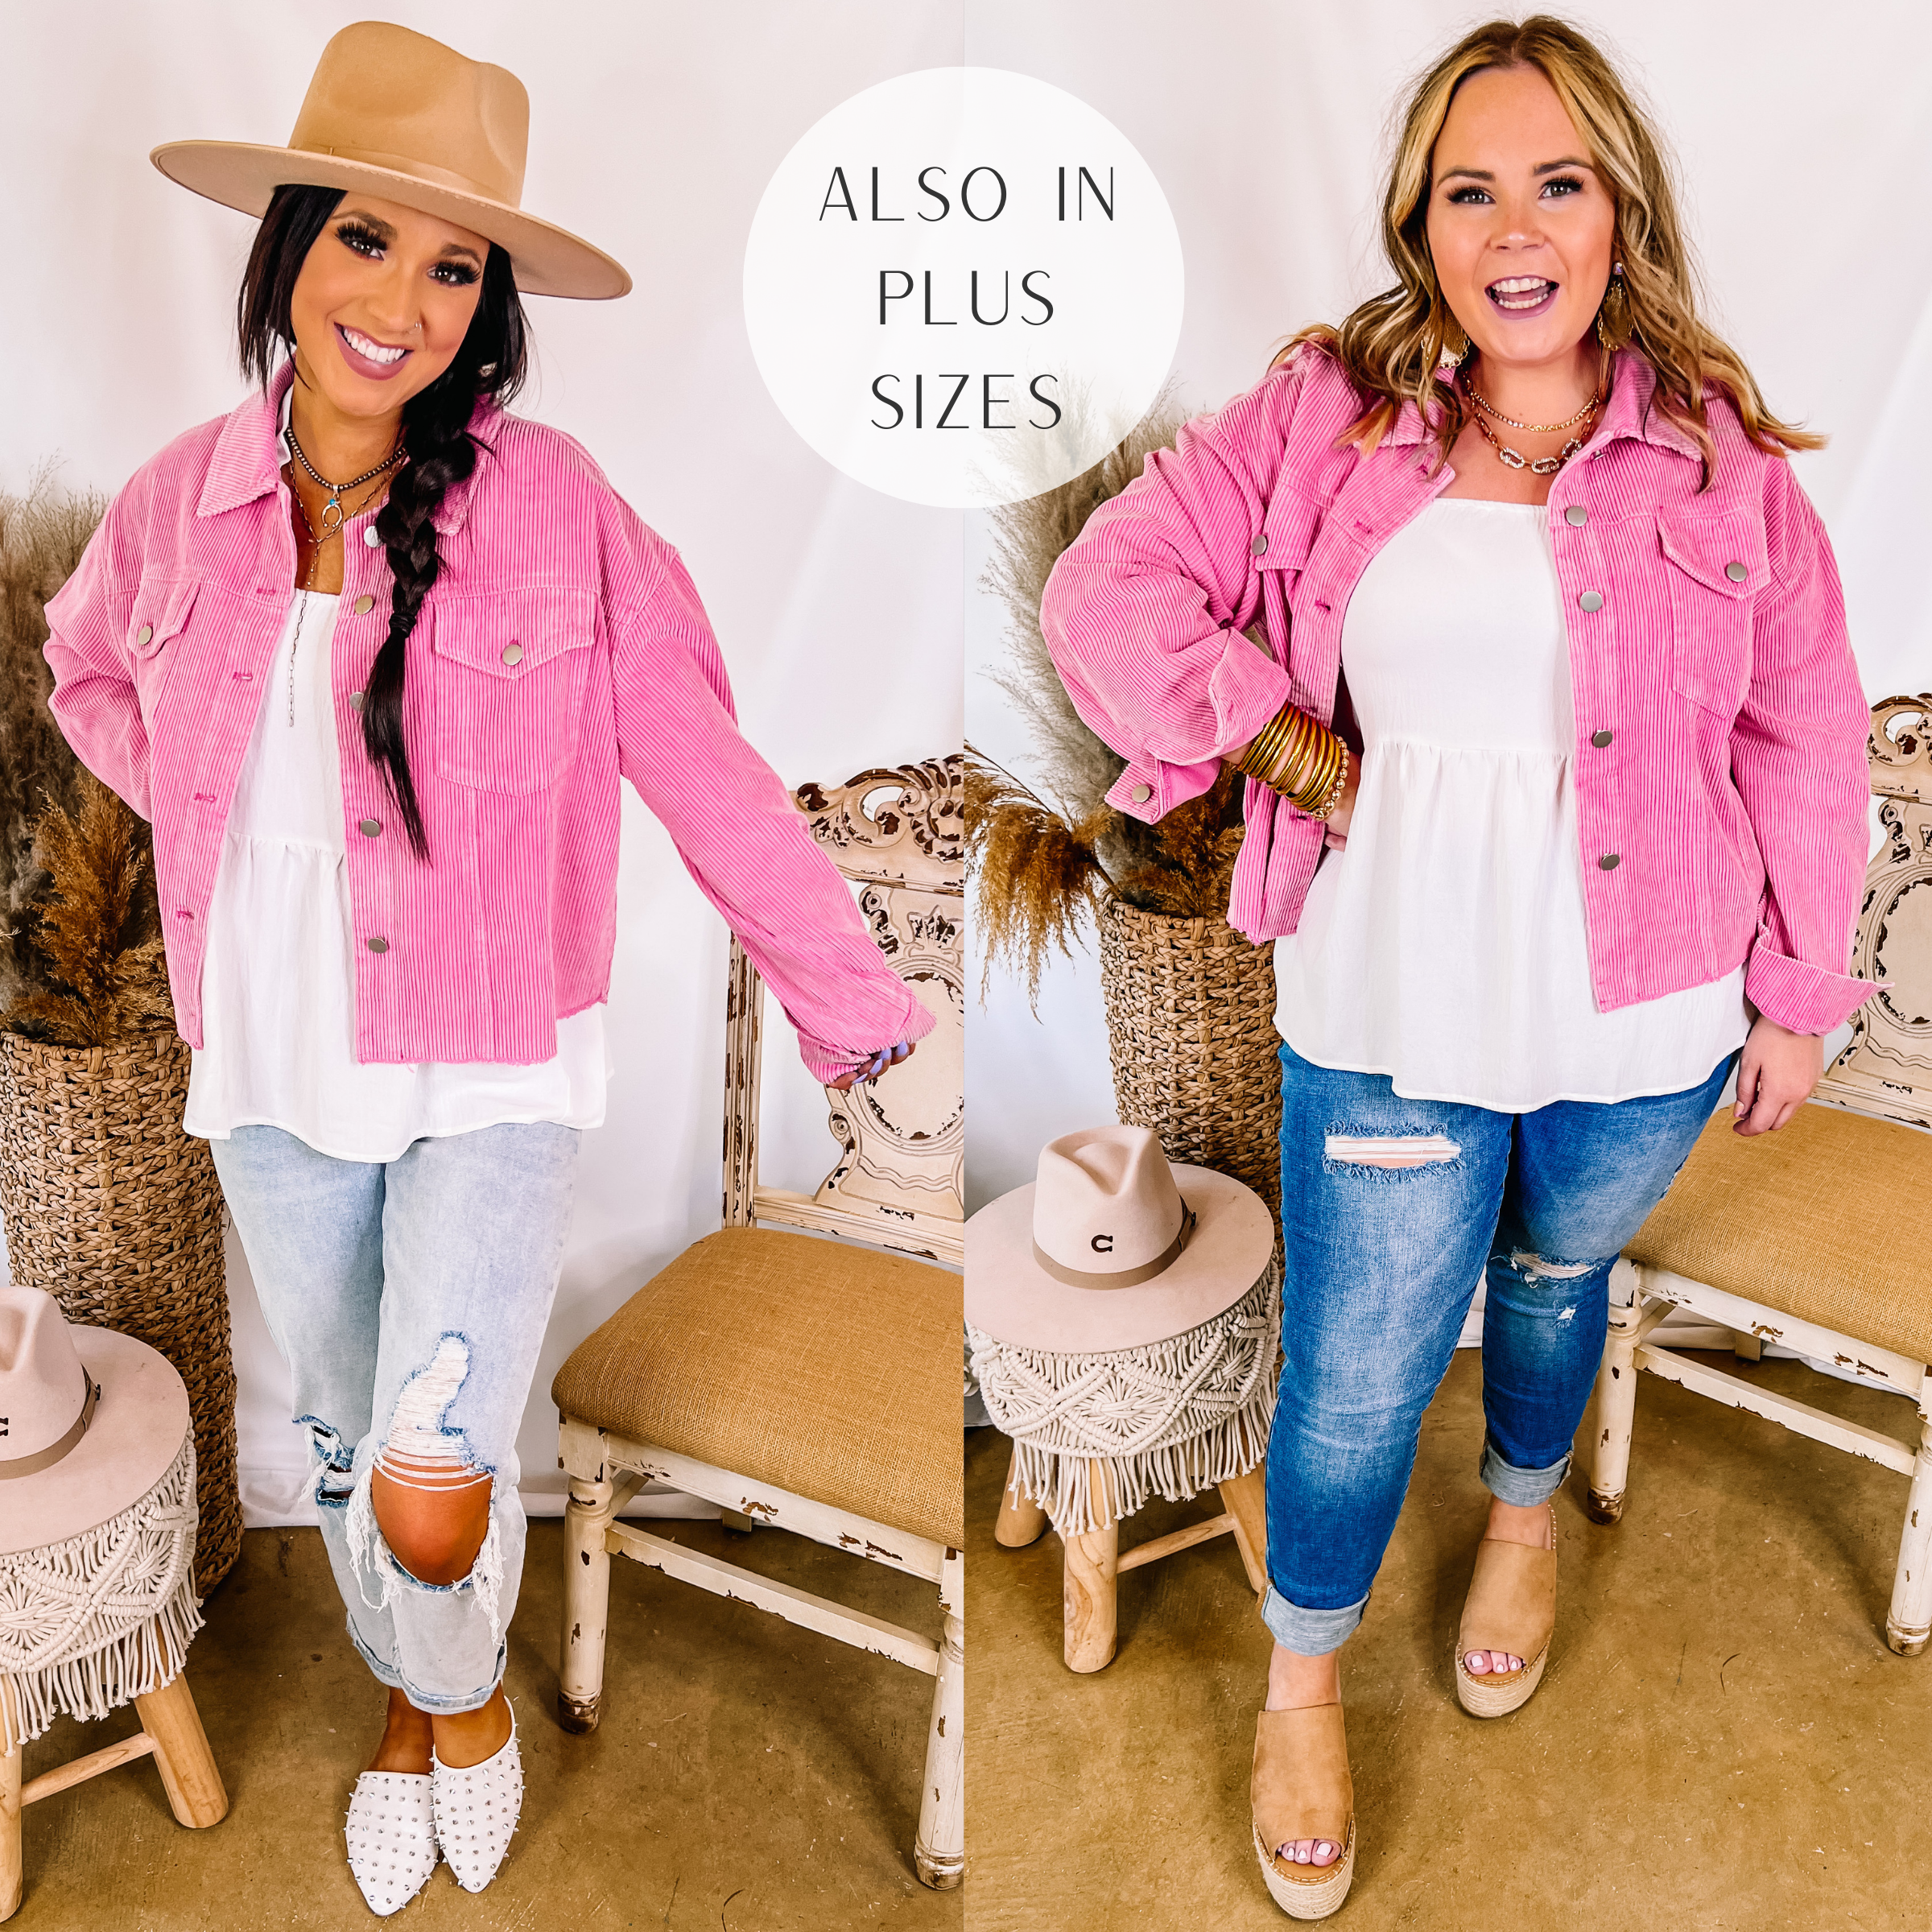 Models are wearing a pink corduroy jacket that has a raw hem. Both models have it on over a white tank top. Size small model has it paired with light wash boyfriend jeans, white mules, and a tan hat. Size large model has it paired with distressed skinny jeans, tan wedges, and gold jewelry.